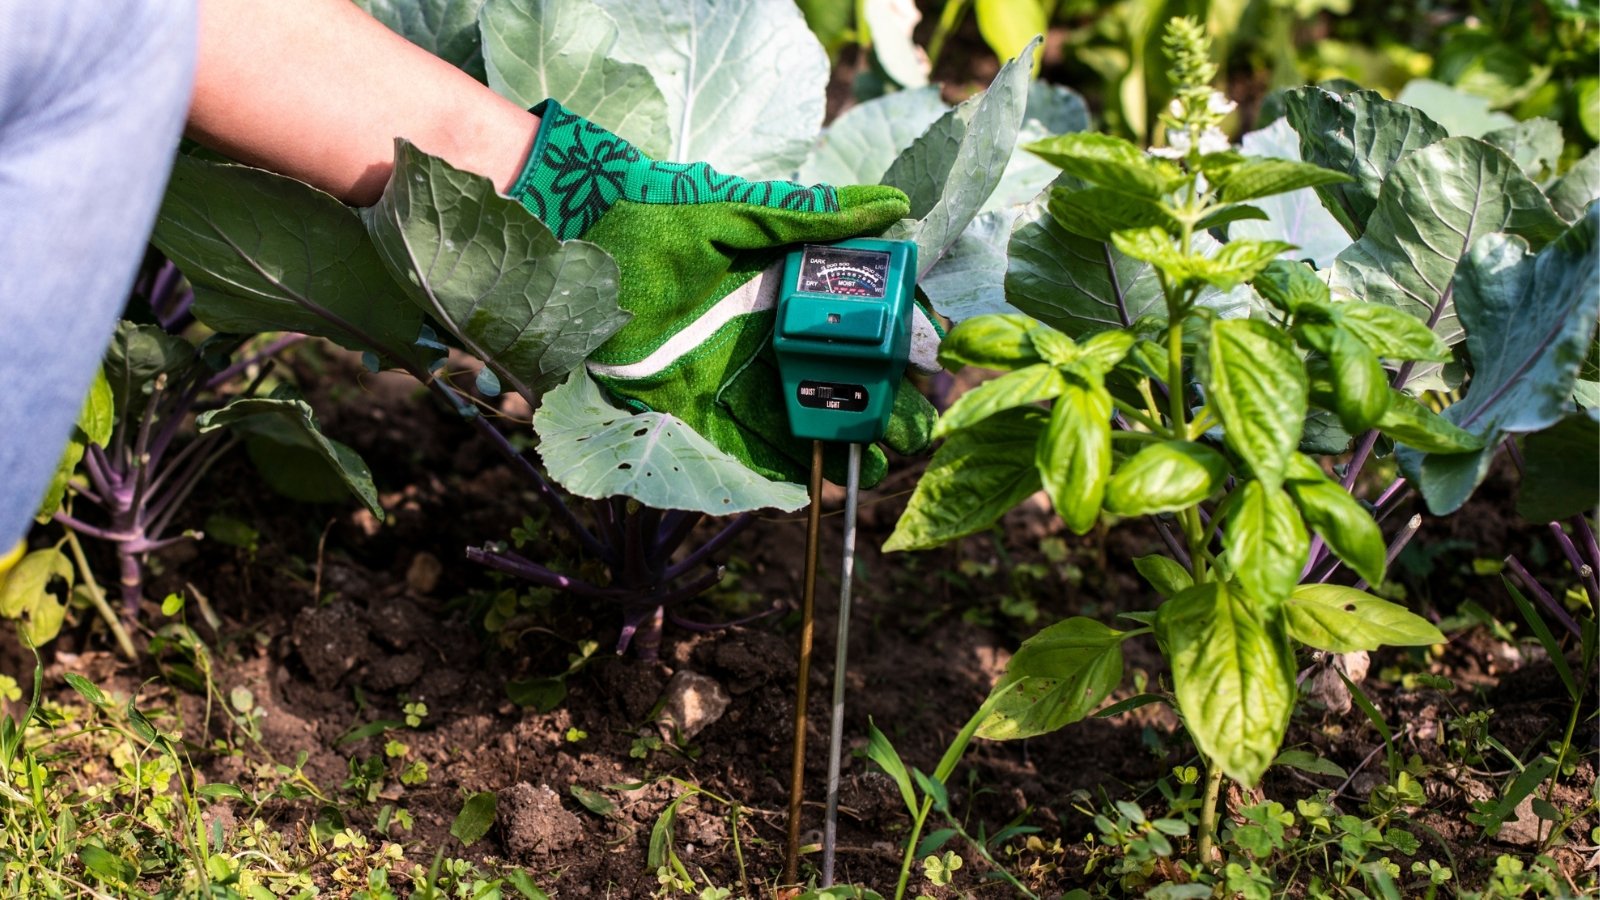 A gardener checks soil moisture with a green tester, surrounded by vibrant plants, ensuring optimal hydration for the lush greenery in the garden bed.